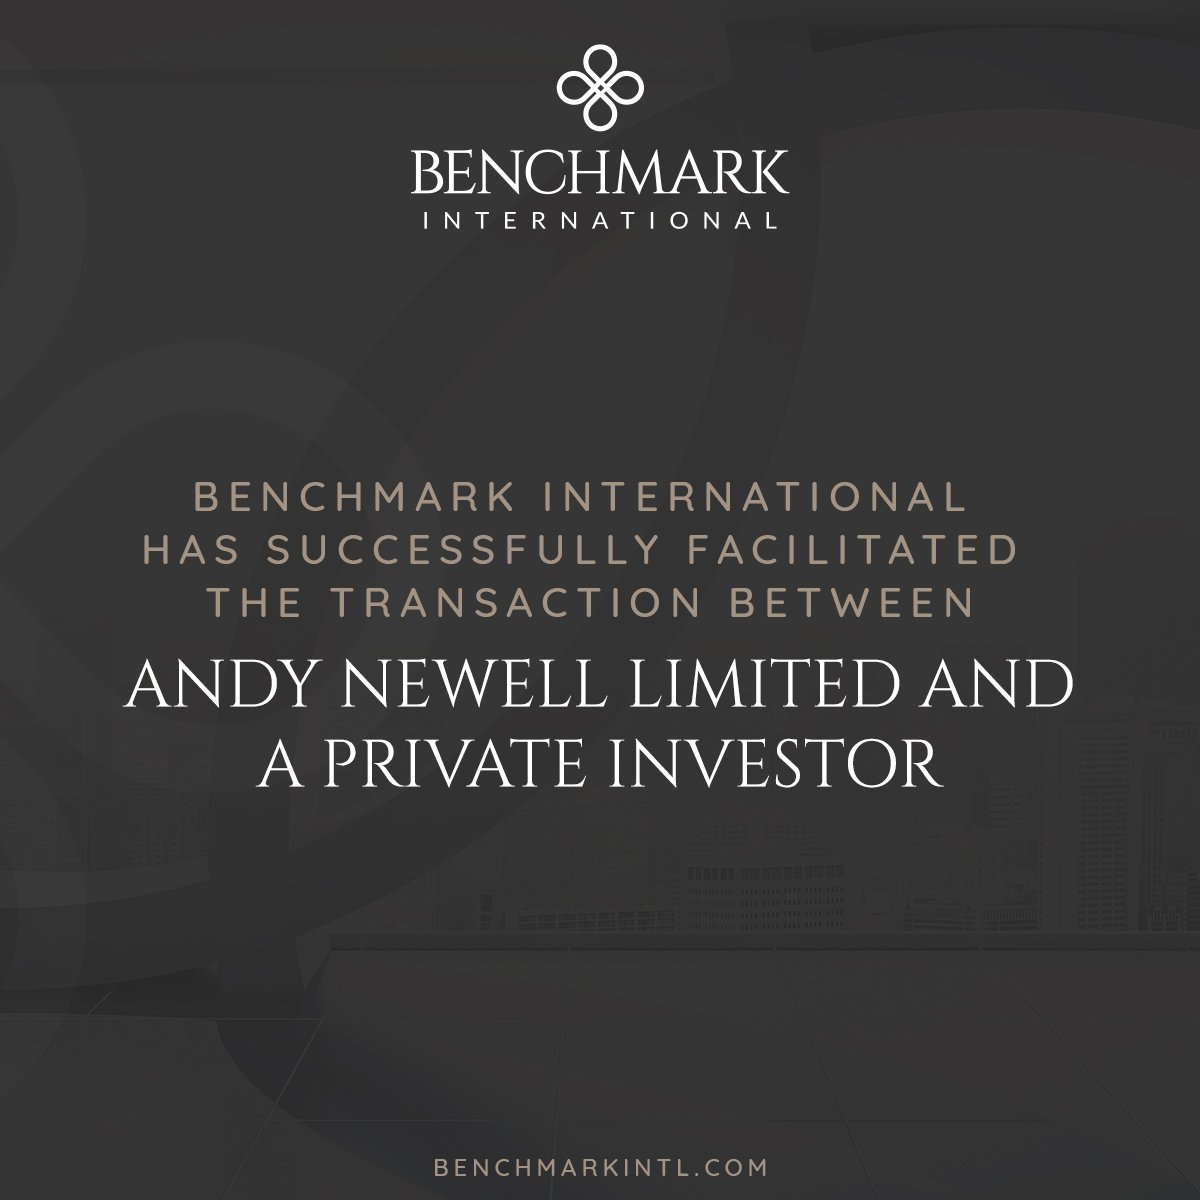 Andy Newell Limited acquired by private investor